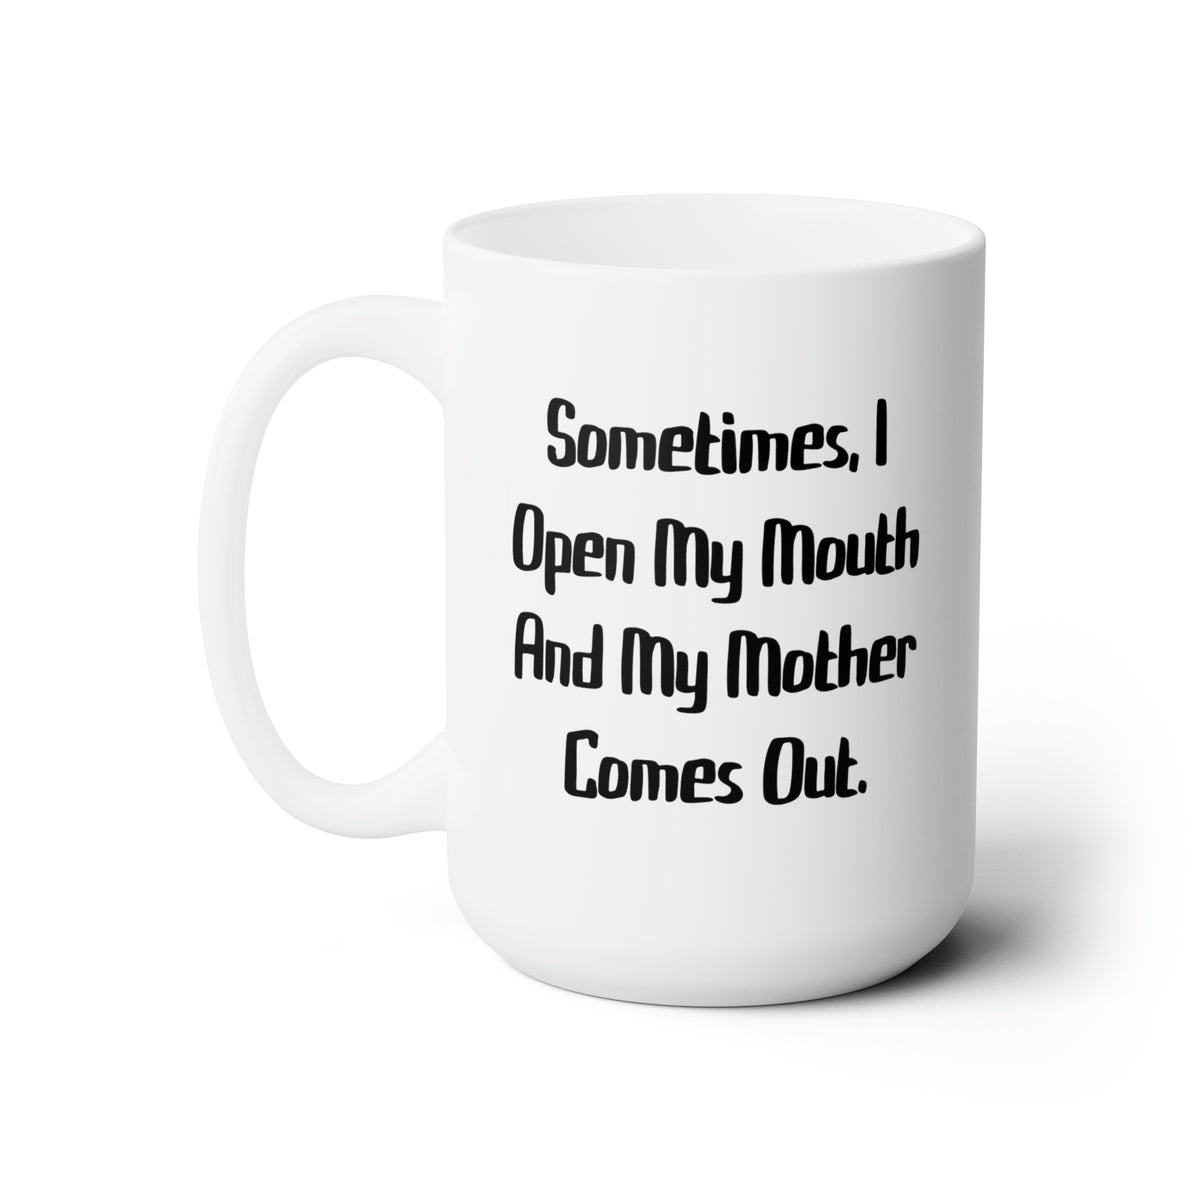 Sometimes, I Open My Mouth And My Mother Comes Out. Mother 11oz 15oz Mug, Cute Mother, Cup For Mom